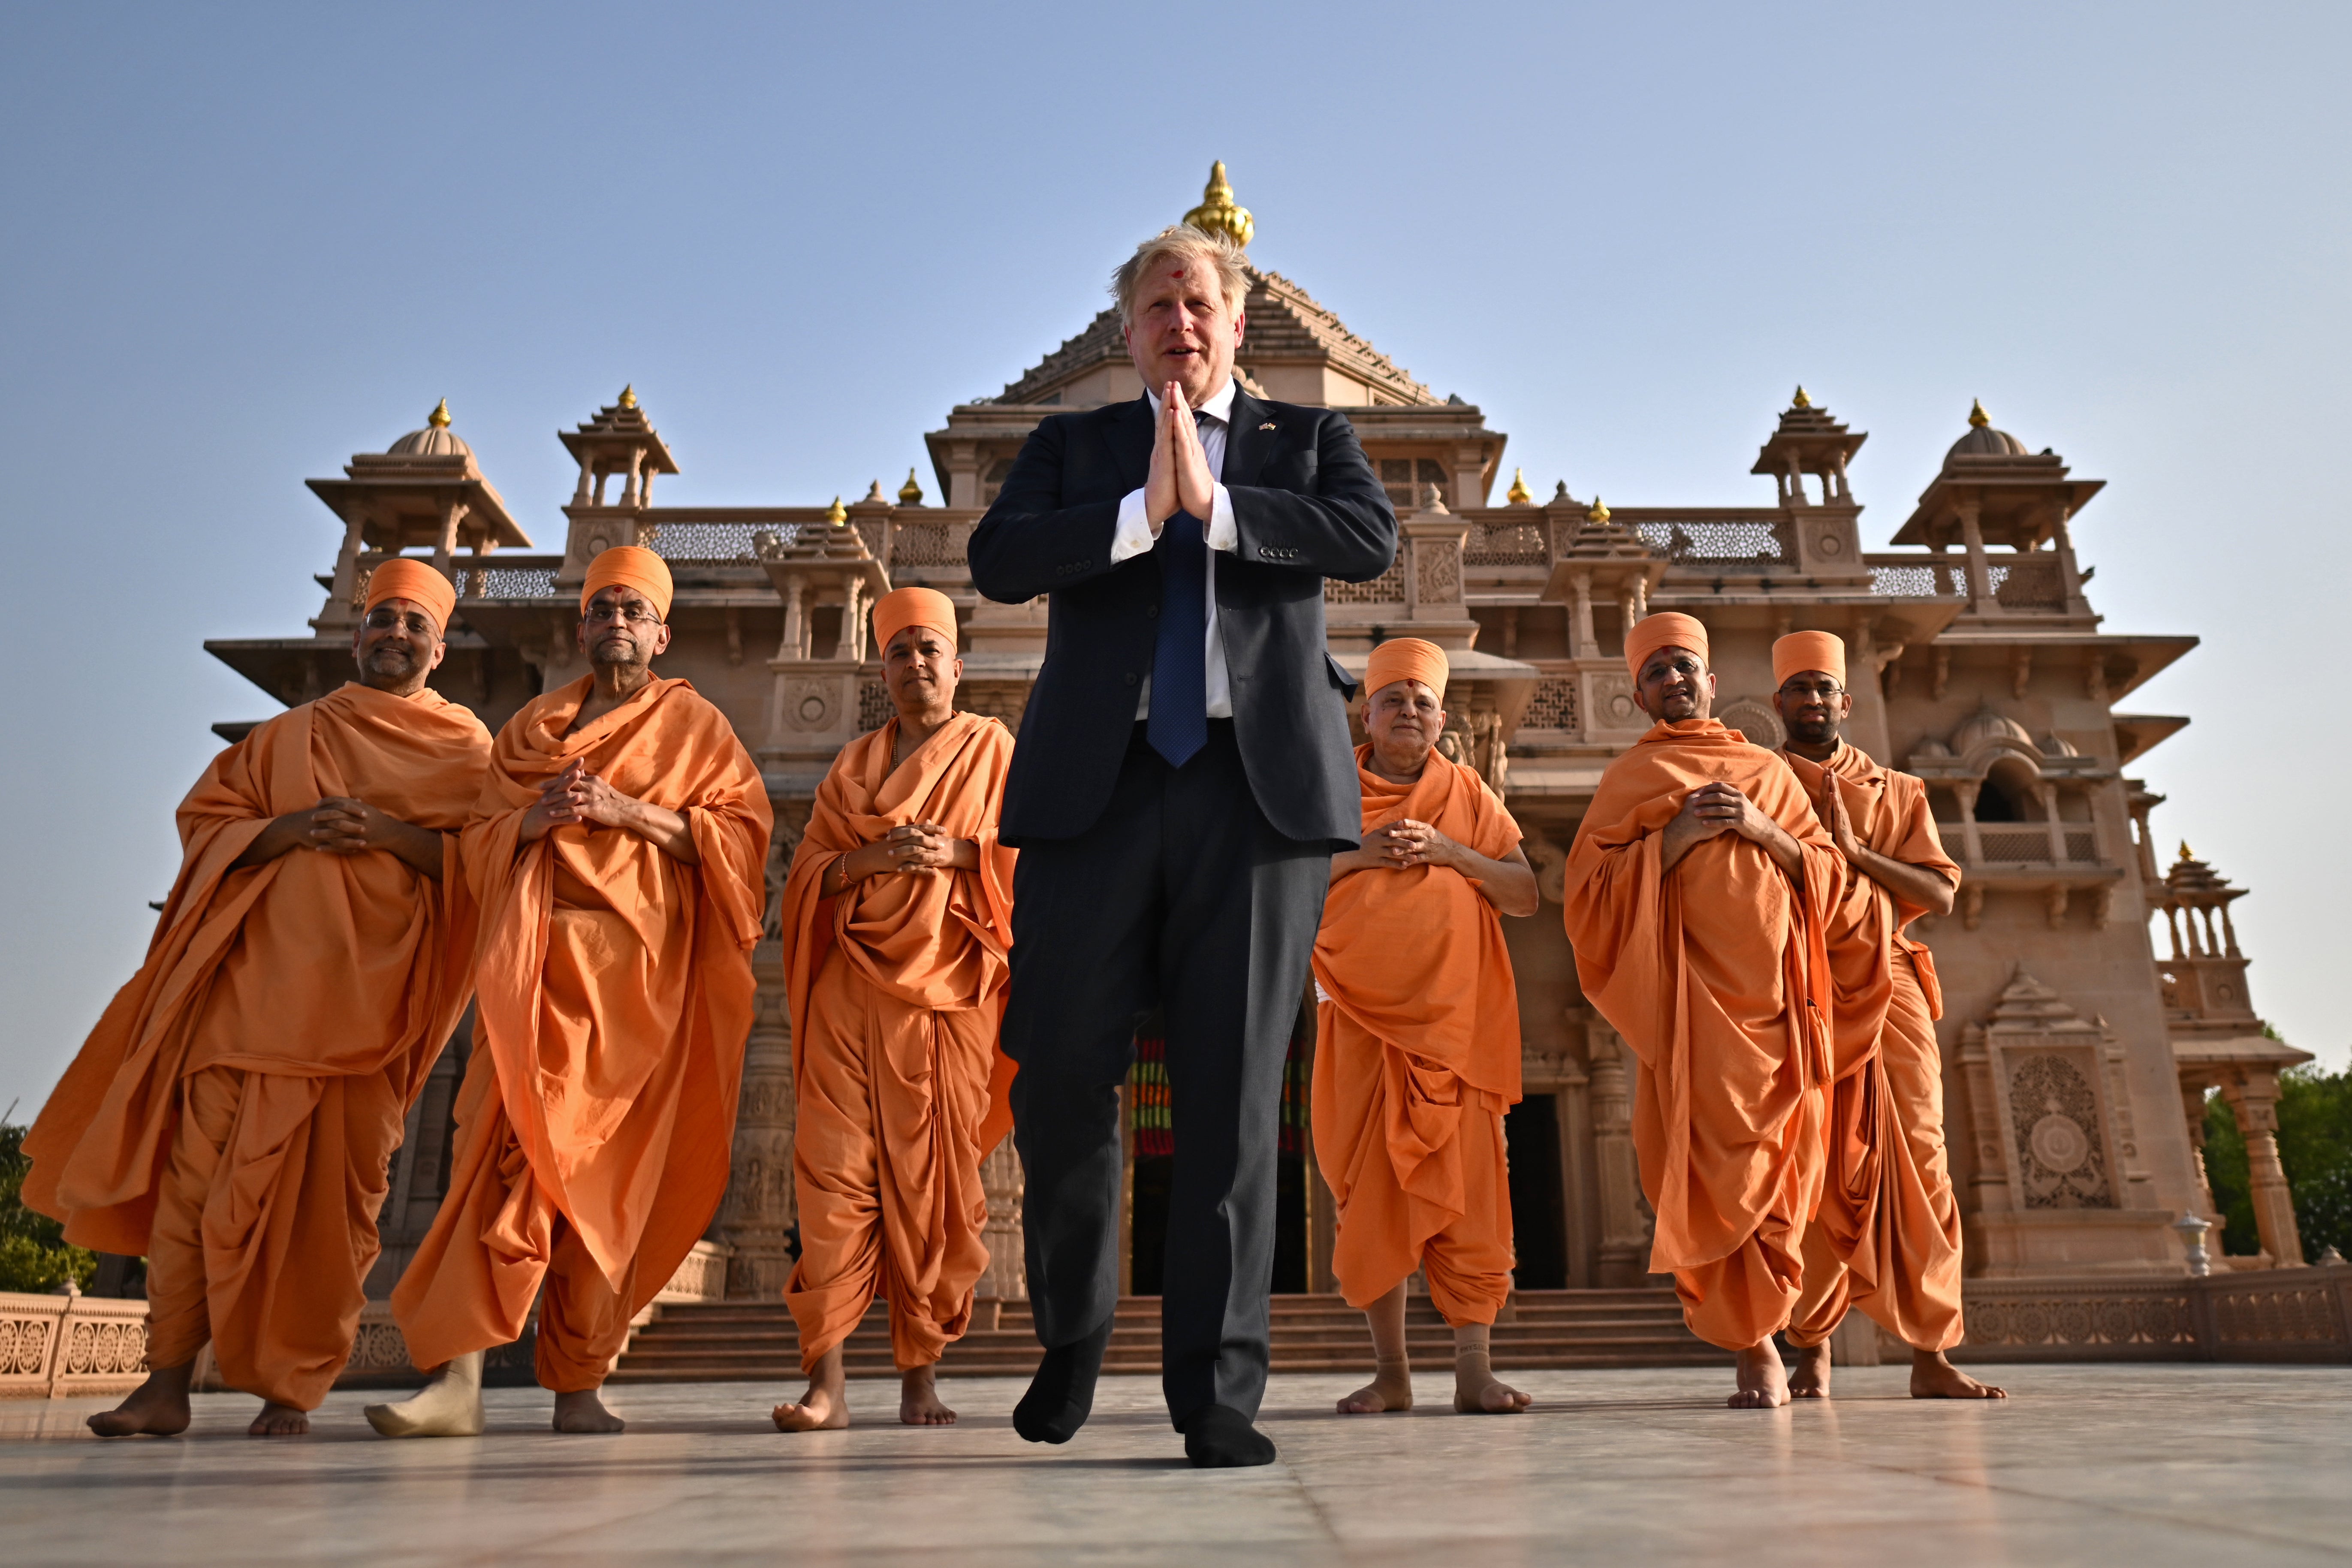 Prime Minister Boris Johnson (C) poses with sadhus or Hindu holymen in front of the Swaminarayan Akshardham temple during his two day trip to India on April 21, 2022 in Gandhinagar, India. During his two-day visit to India Boris Johnson is expecting to seal new collaborations on defence and green energy as he seeks to reduce the country’s dependence on Russian fossil fuels and military equipment